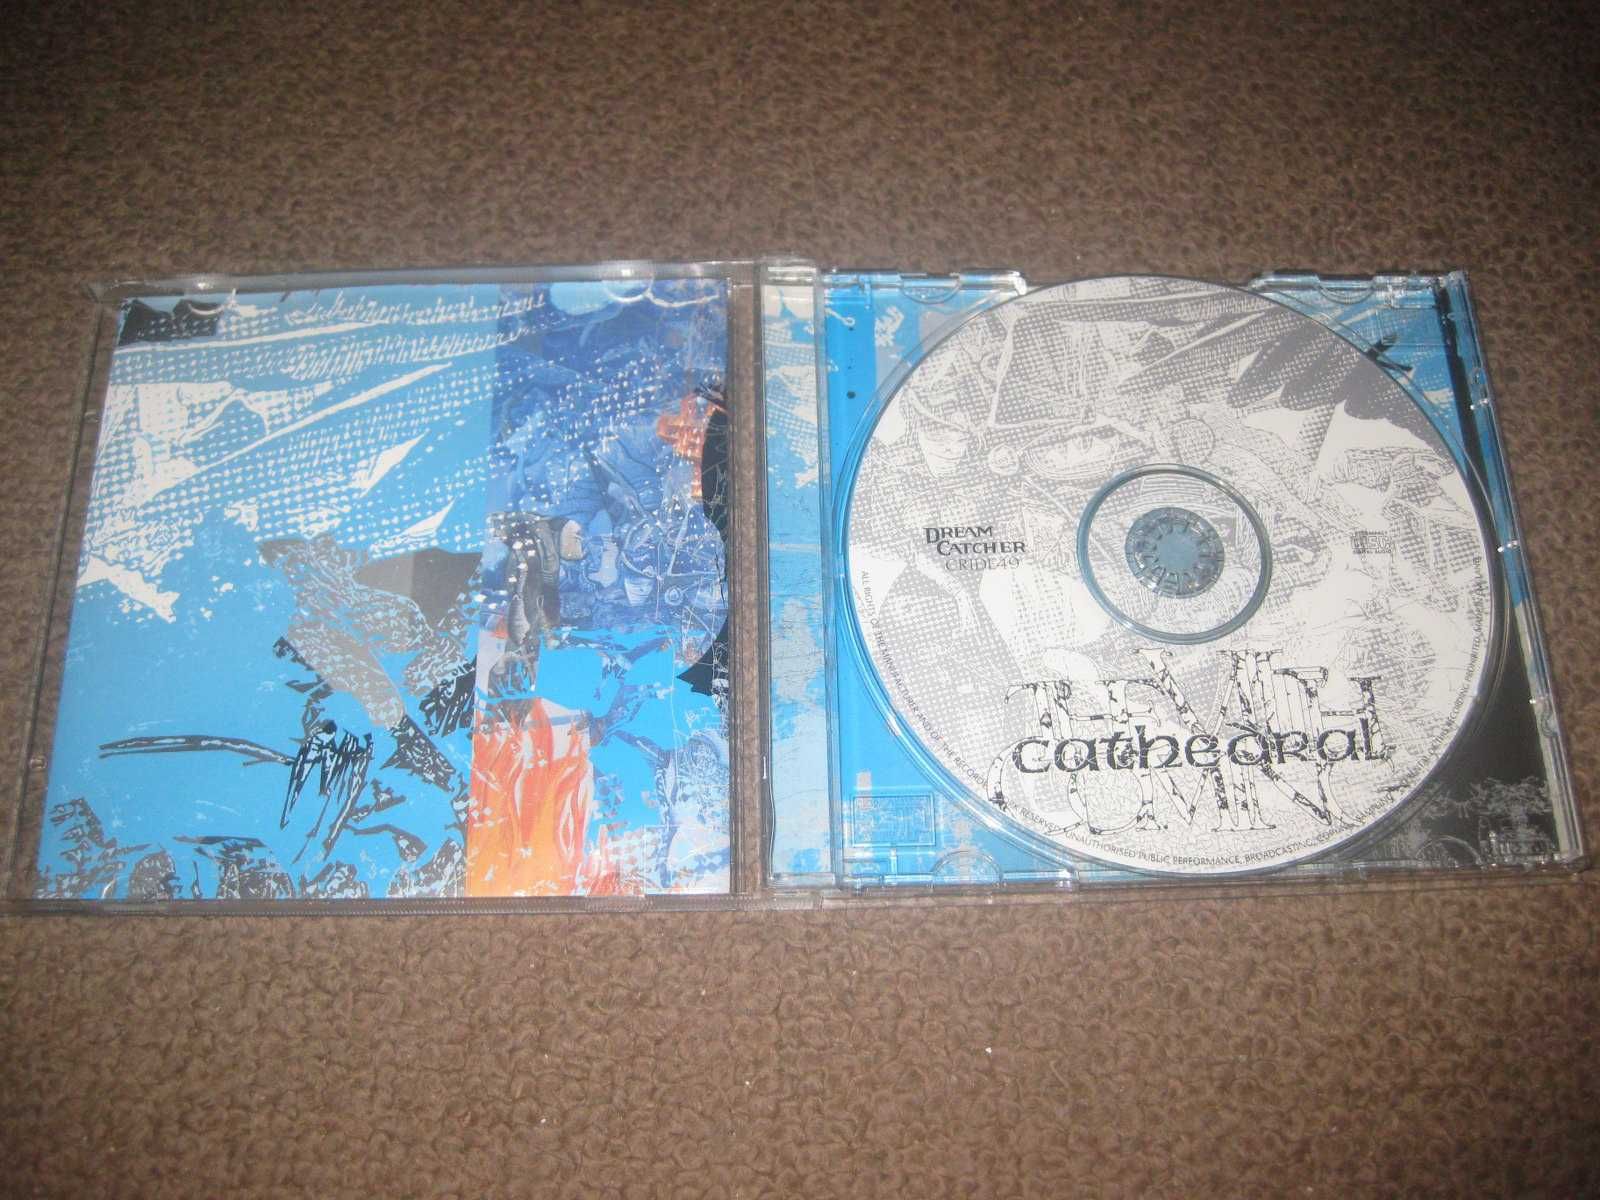 CD dos Cathedral "The ViIth Coming" Portes Grátis!